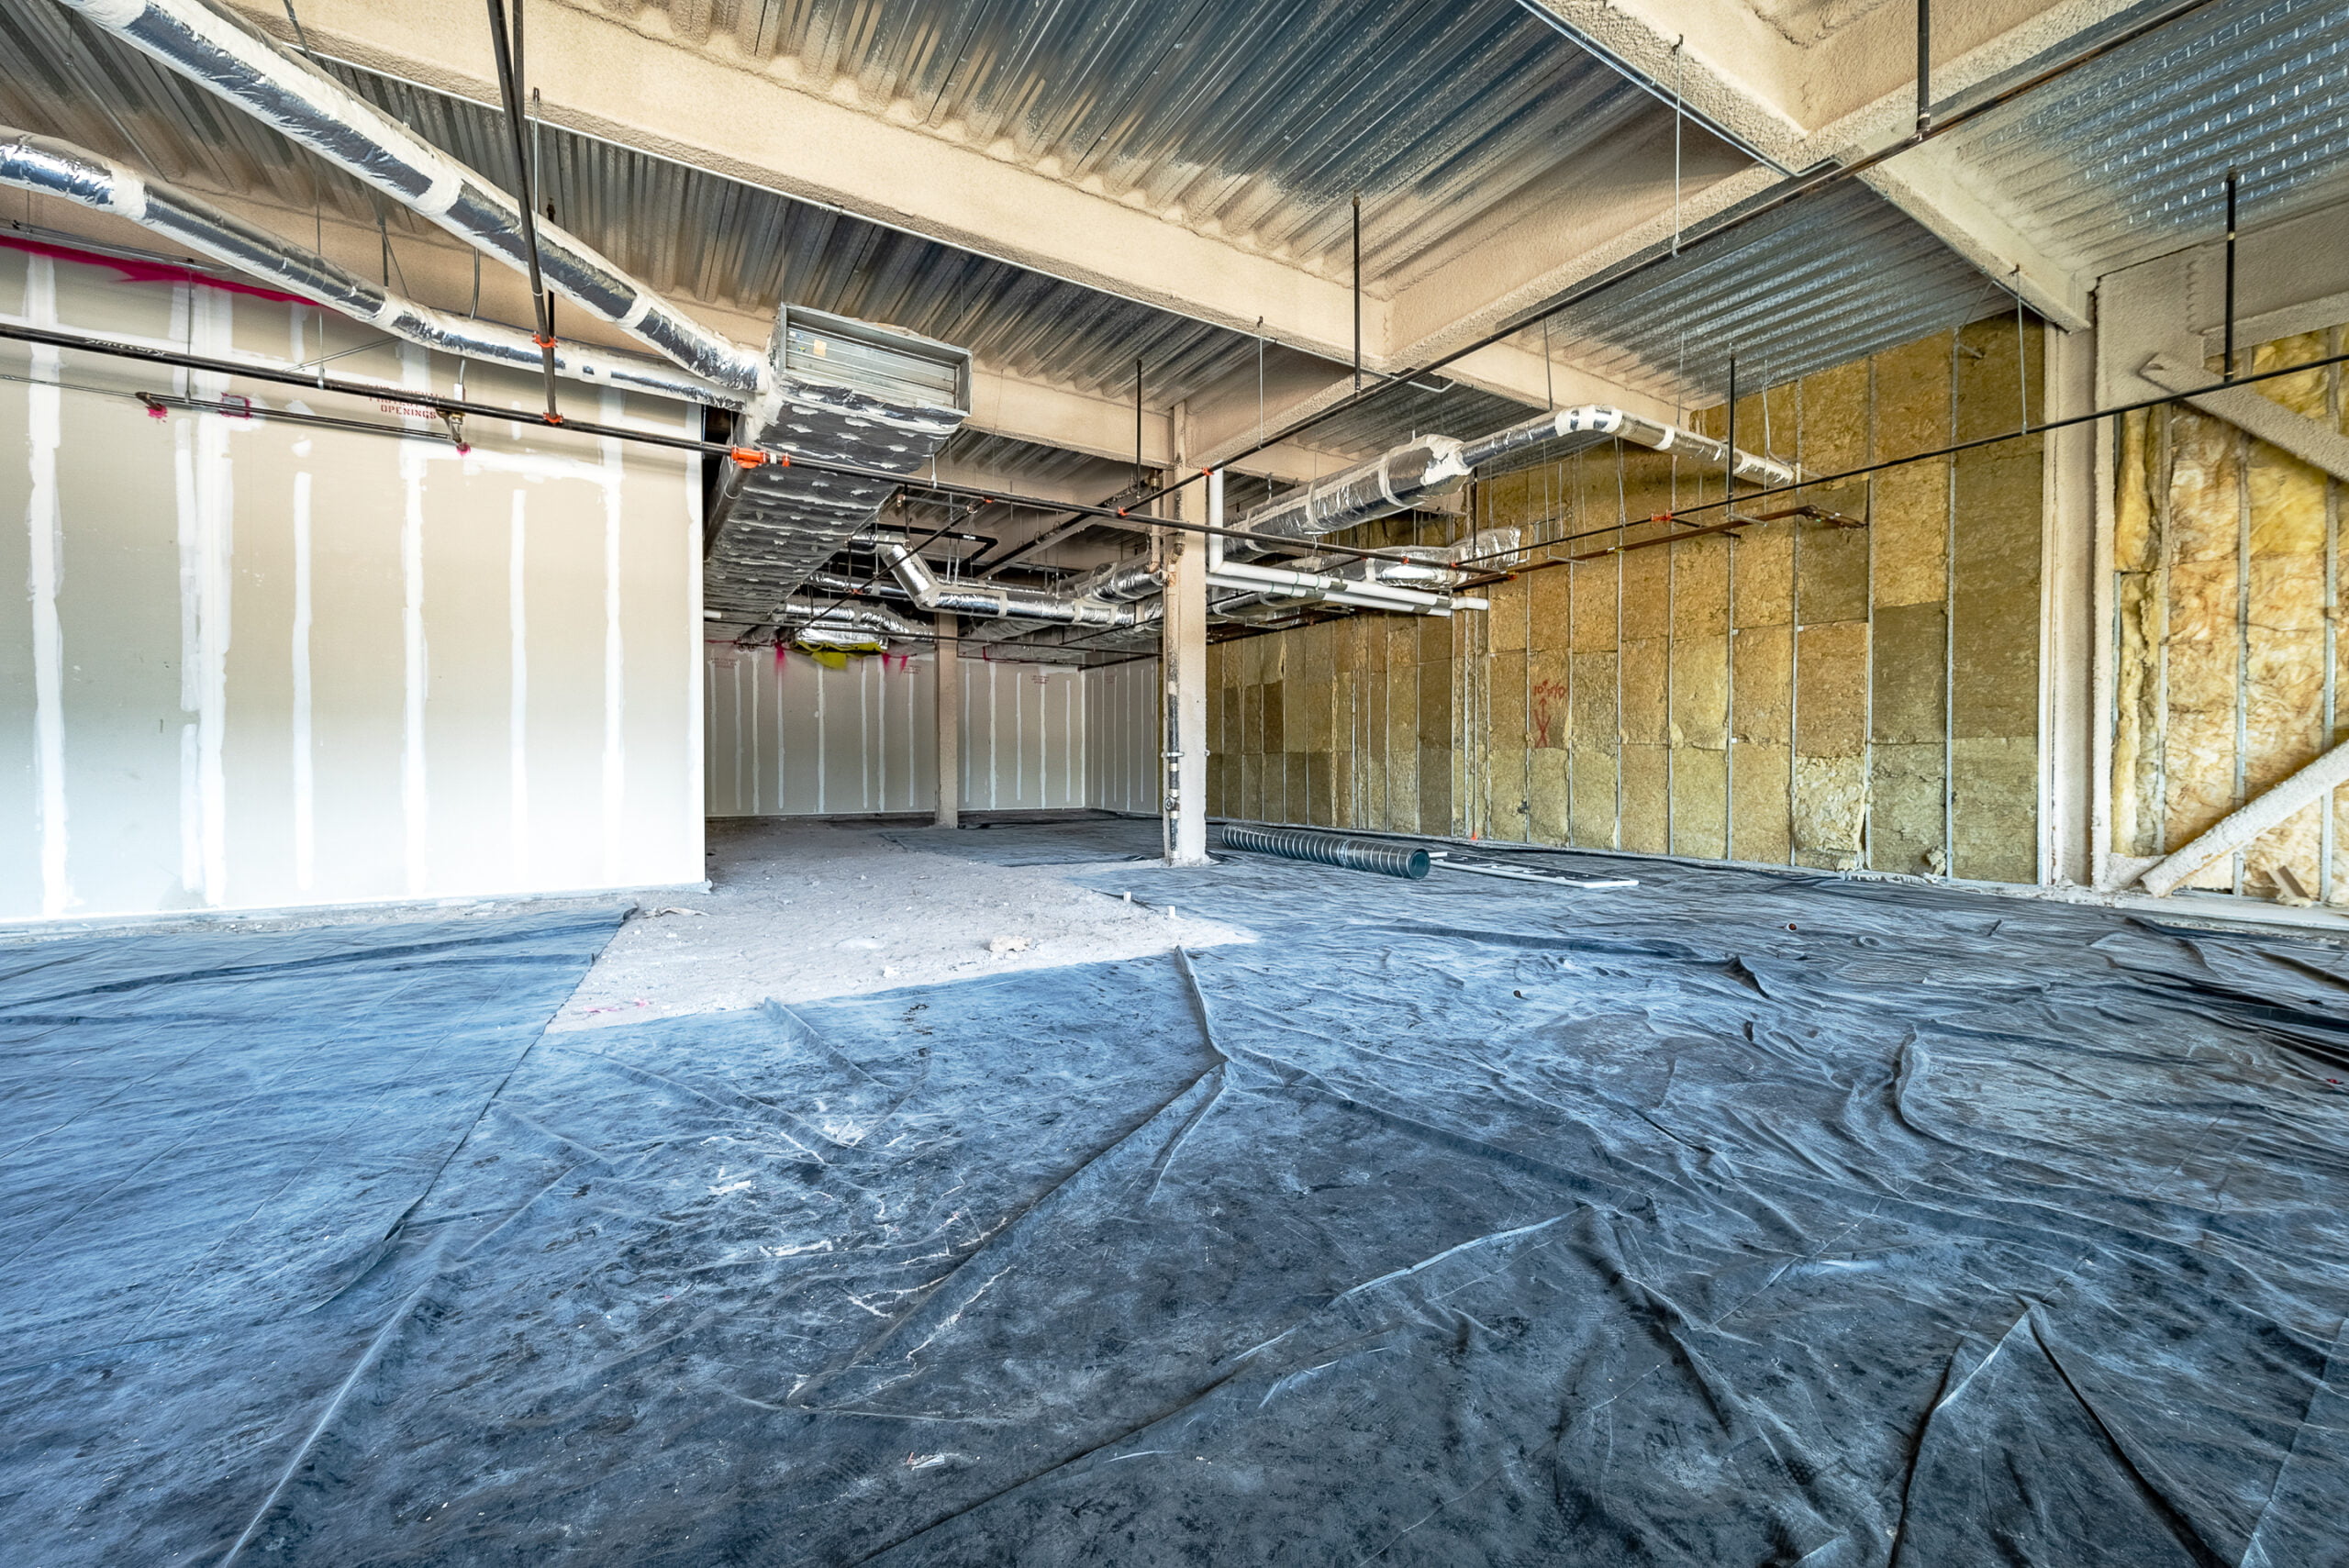 This photo shows an unfinished interior space under construction, with exposed insulation, ductwork, and structural elements. A protective plastic sheet covers the floor.